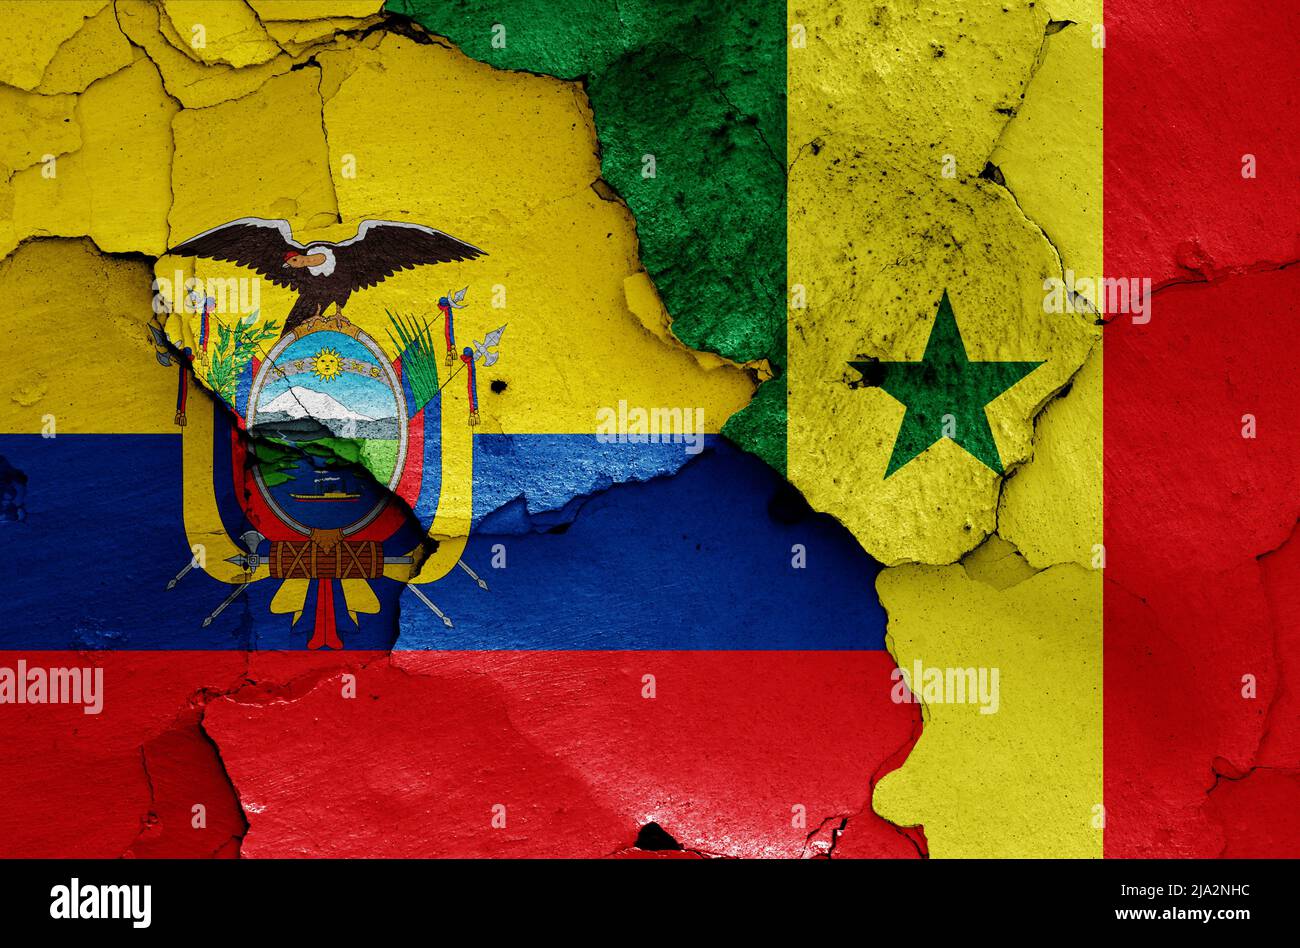 flags of Ecuador and Senegal painted on cracked wall Stock Photo